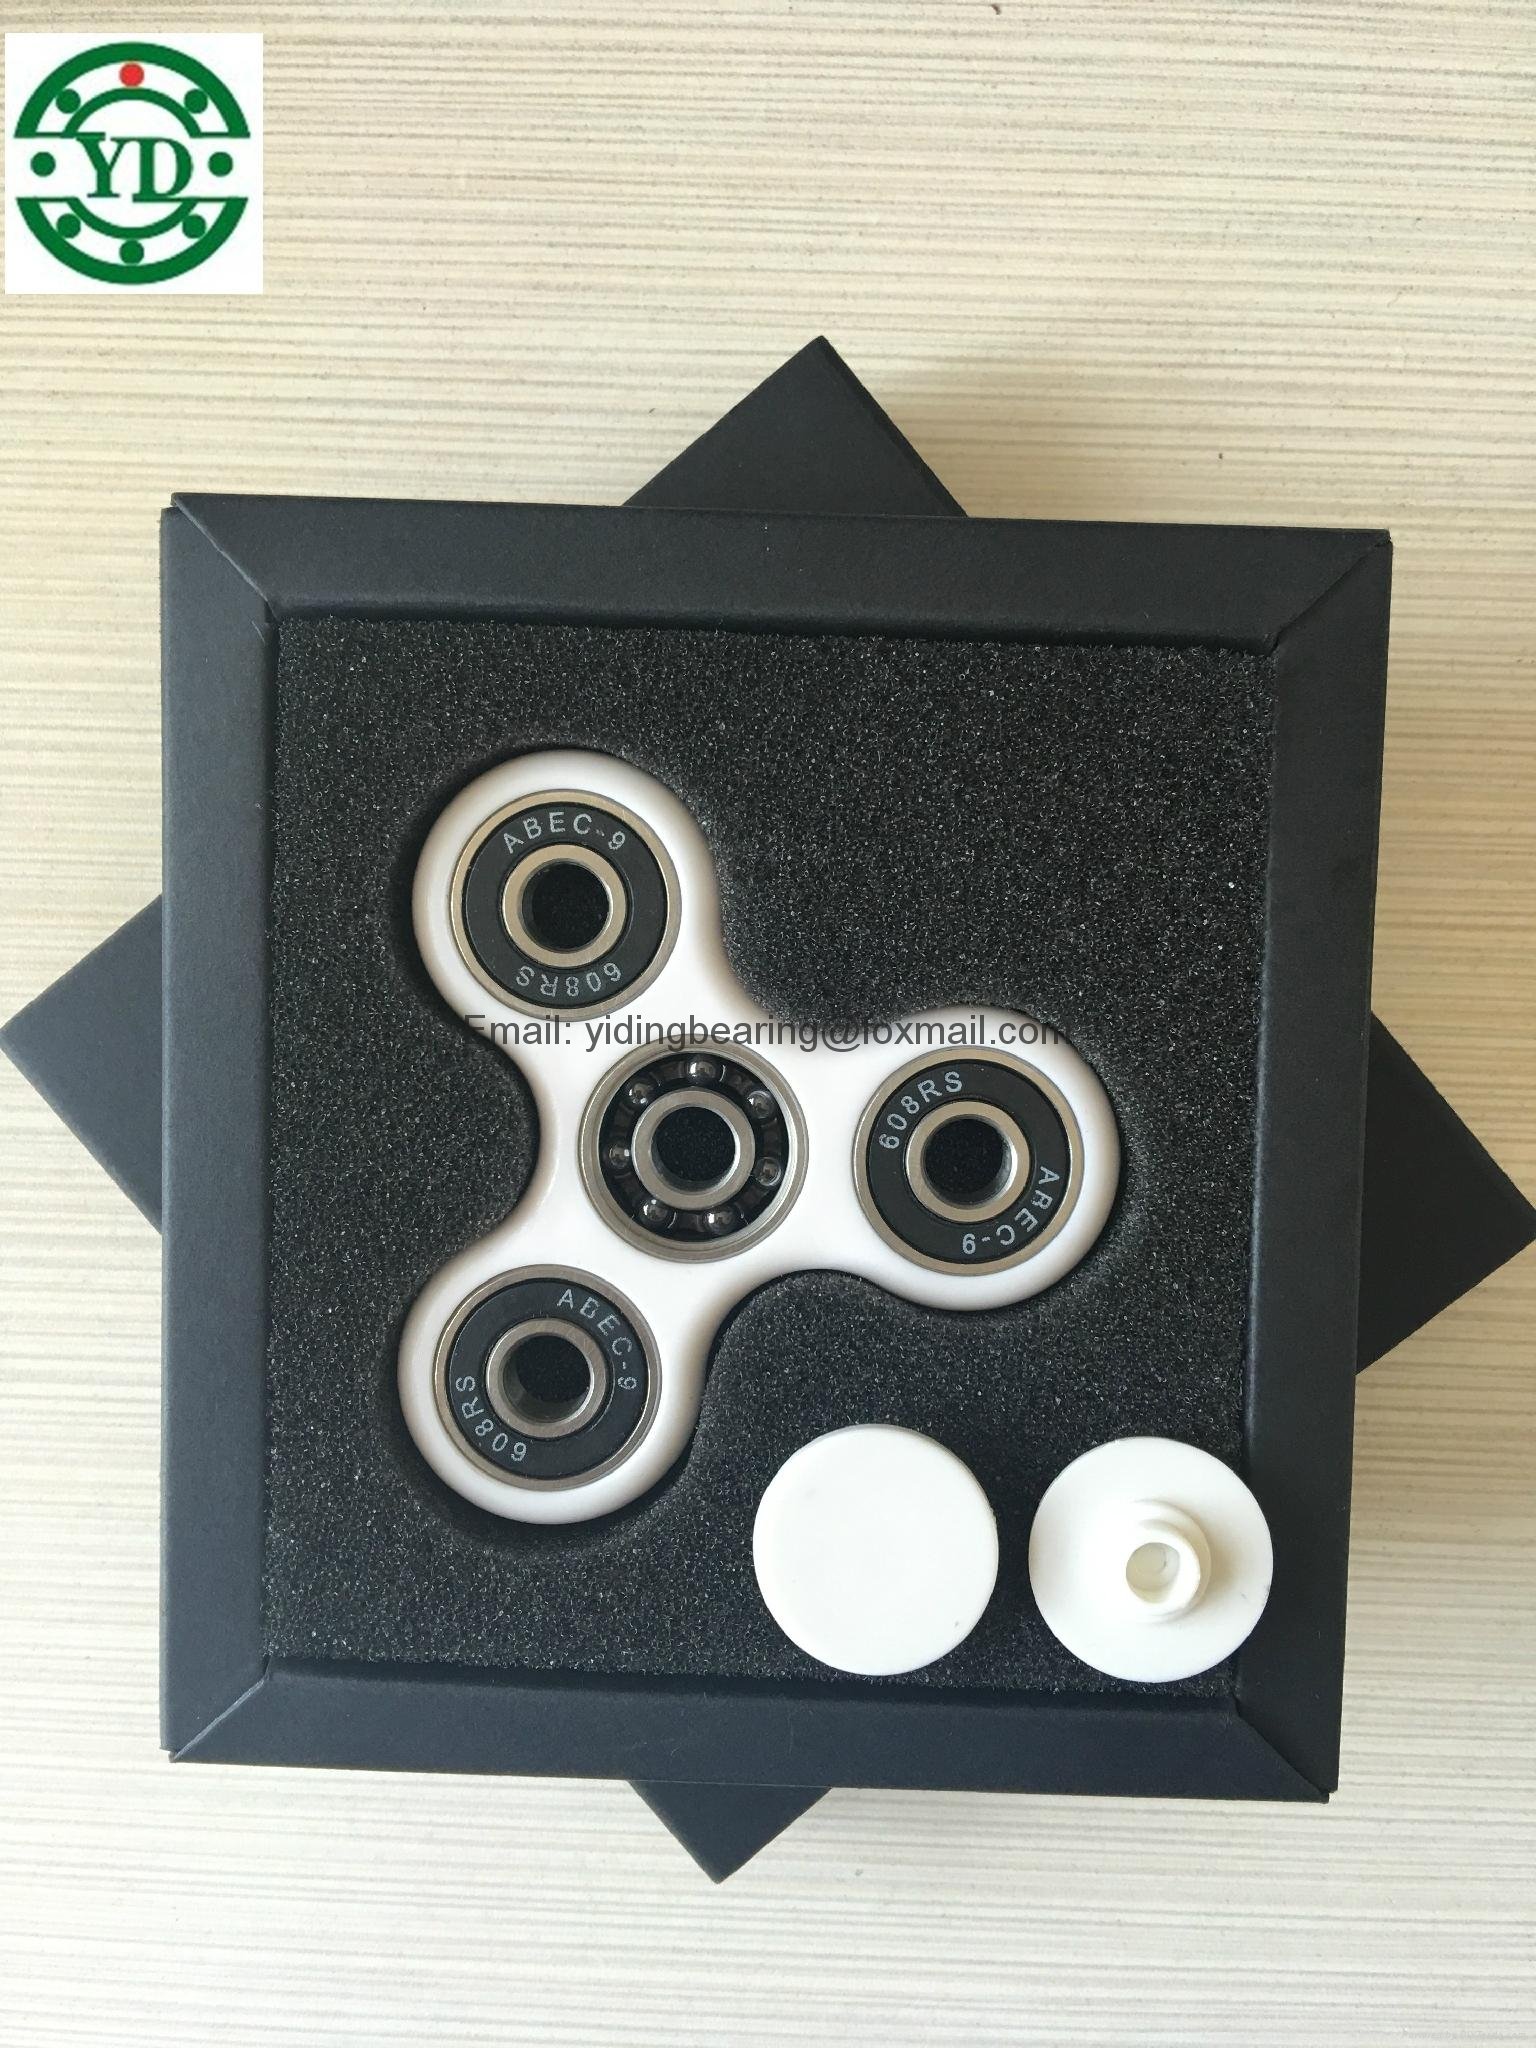 Hot sale ABS plastic hand spinner fidget spinner with 608 bearing 4